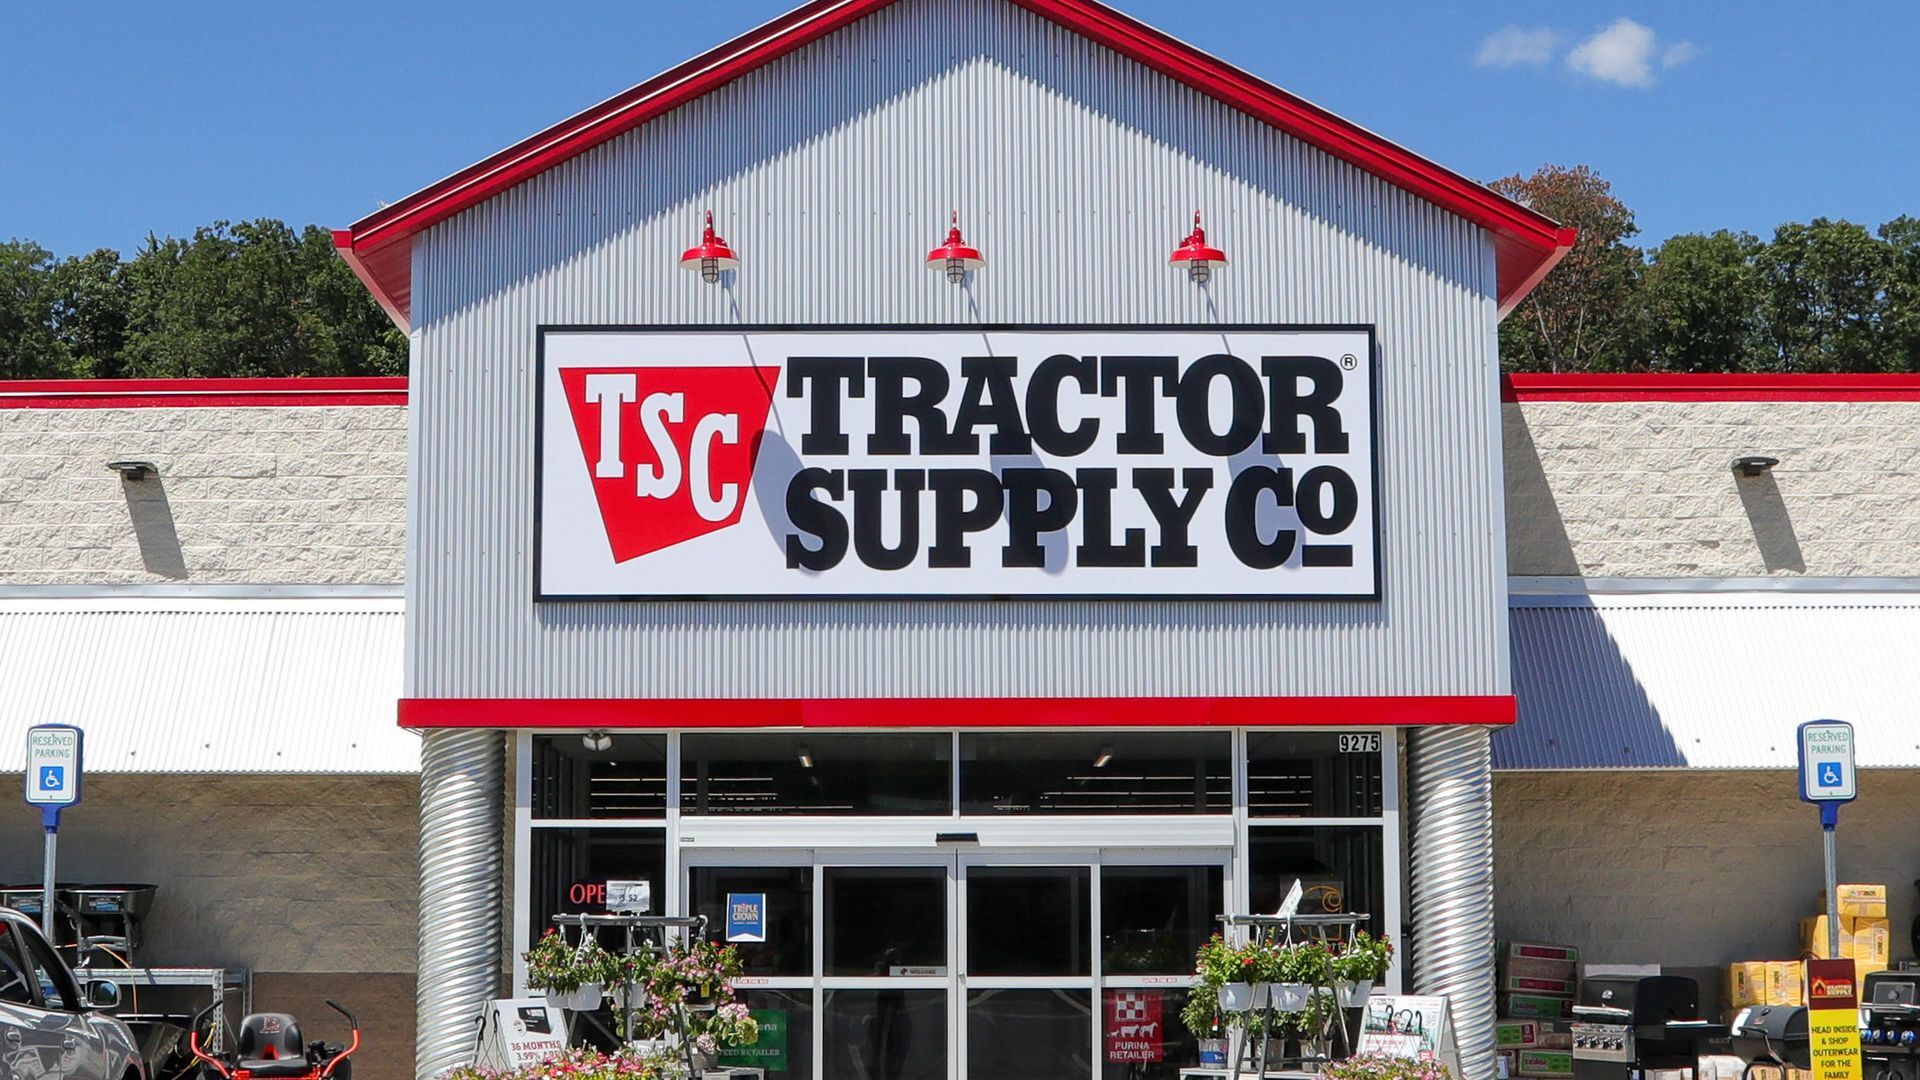 Tractor Supply Co. faces controversy after recent decisions regarding its DEI initiatives sparked strong reactions politically.